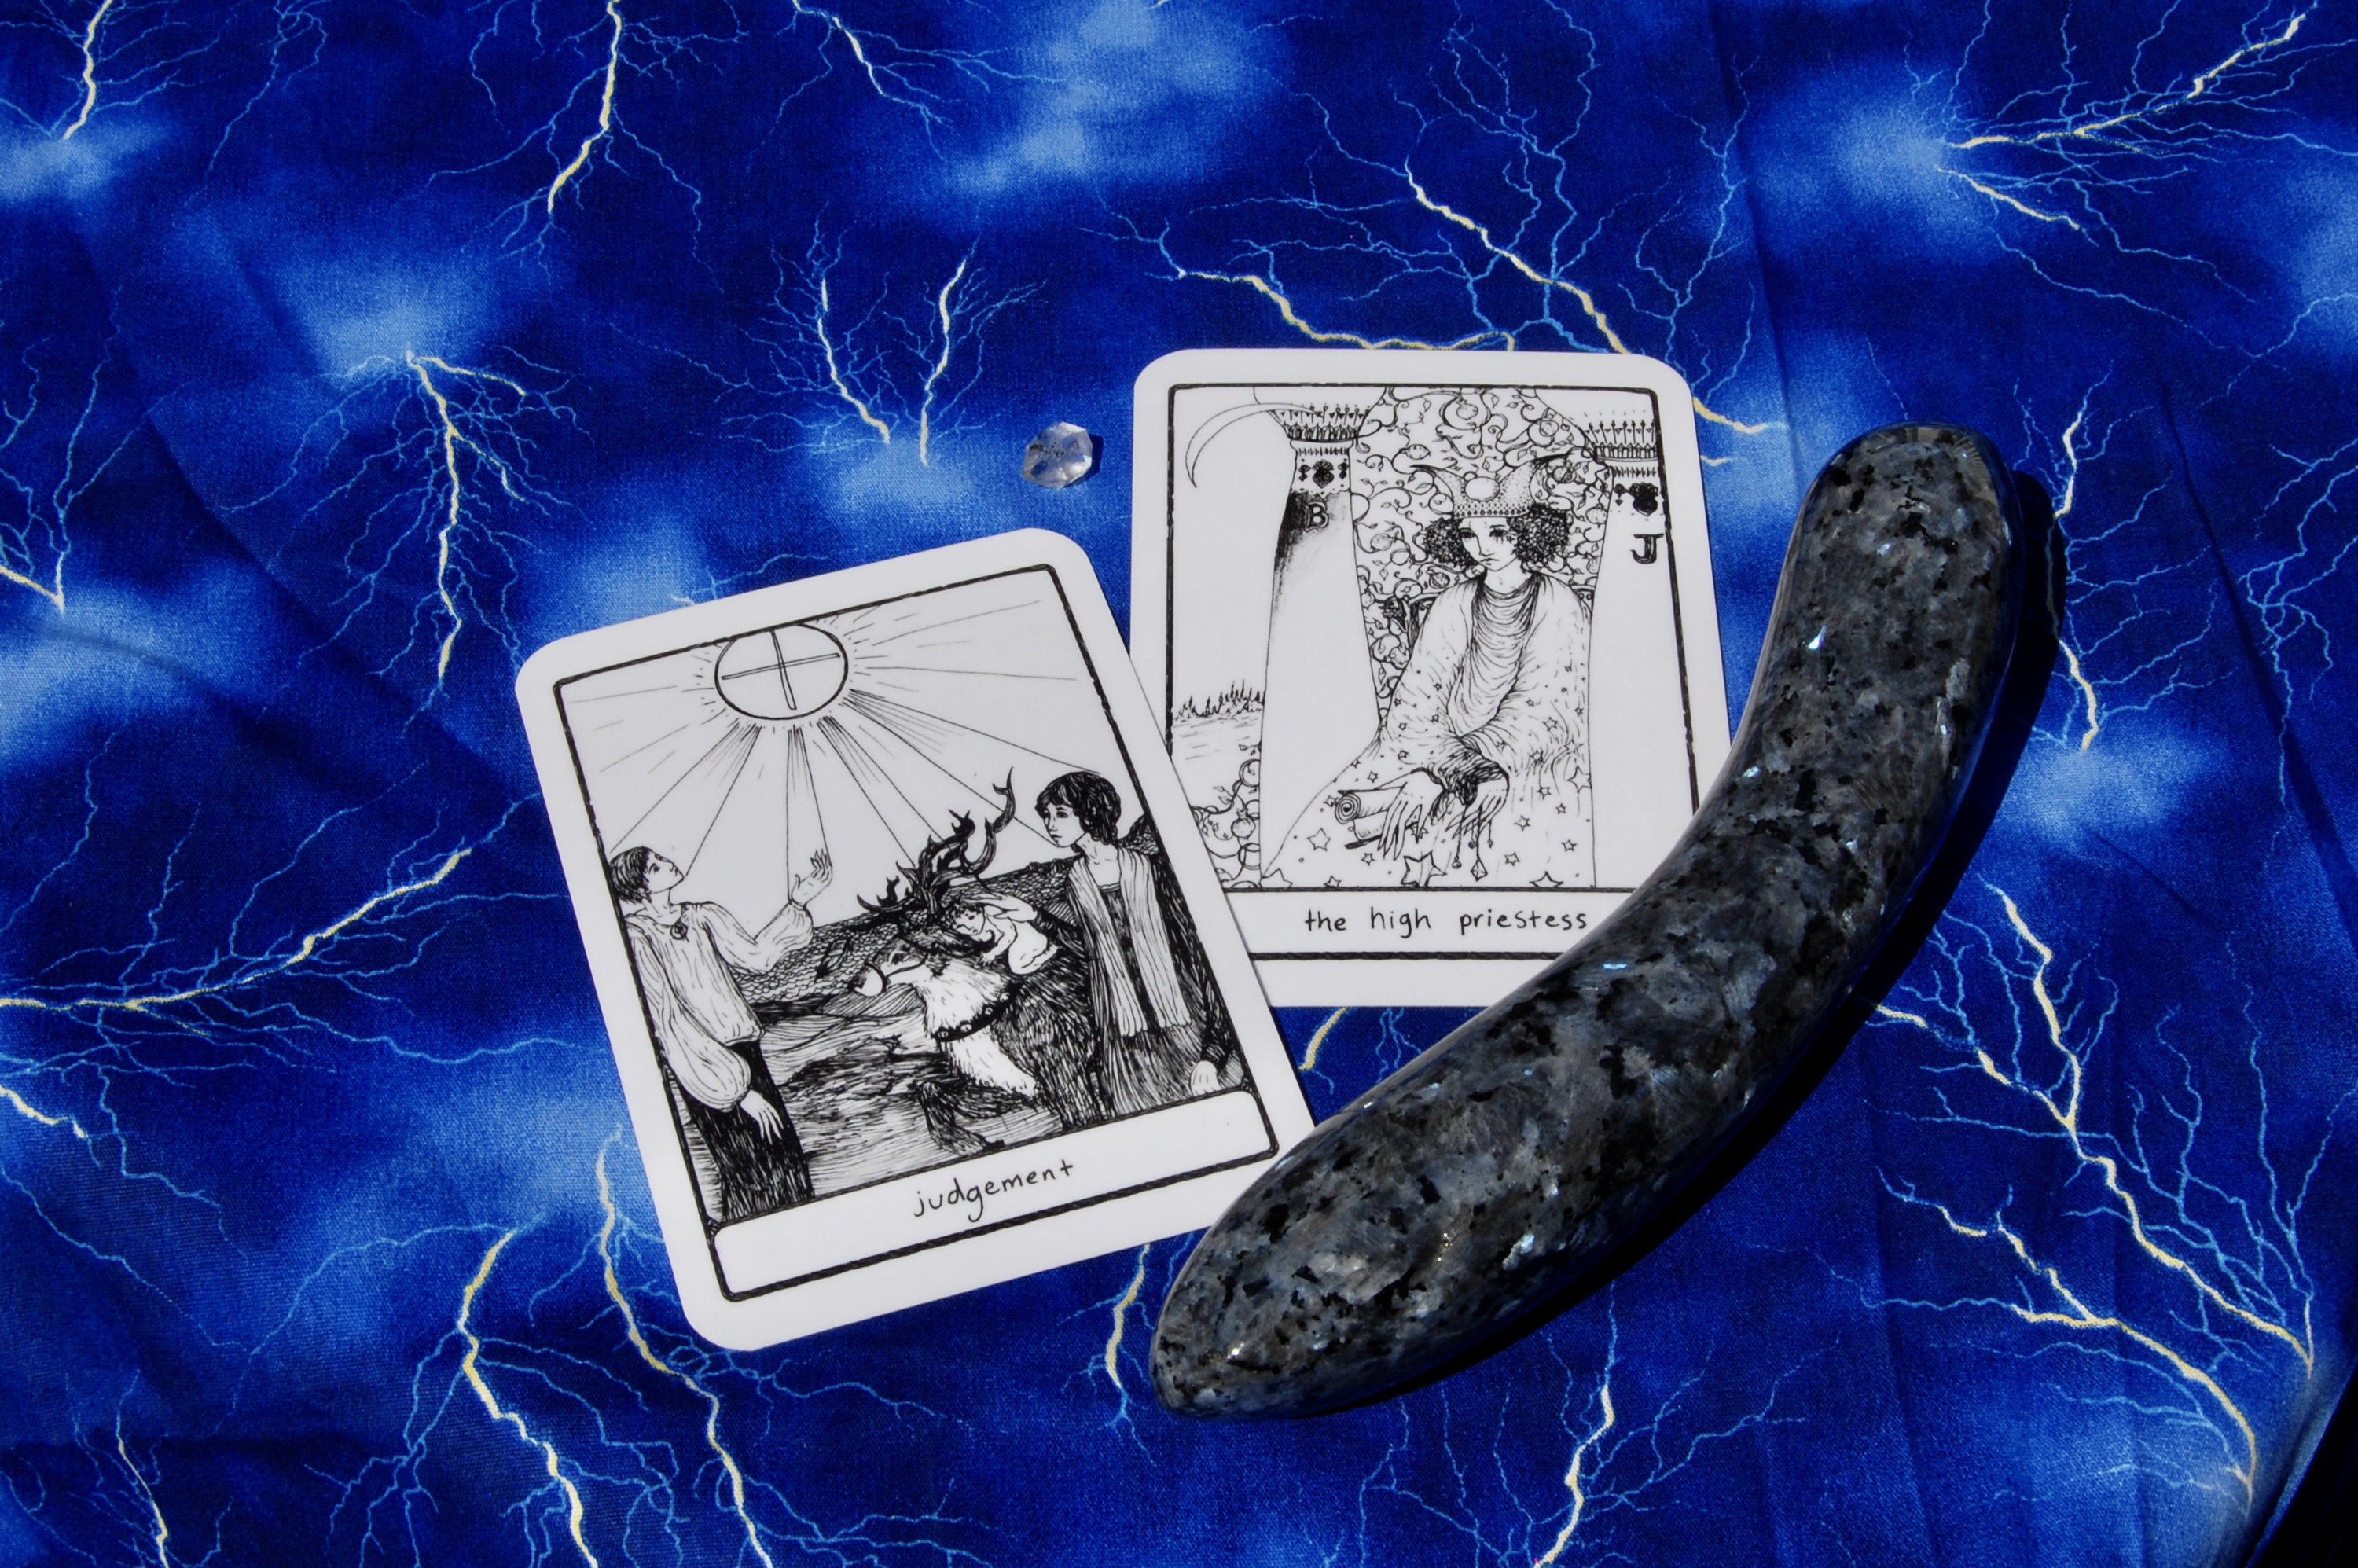 Photo of crystal dildo with two tarot cards (Judgement and the High Priestess), plus a tiny crystal